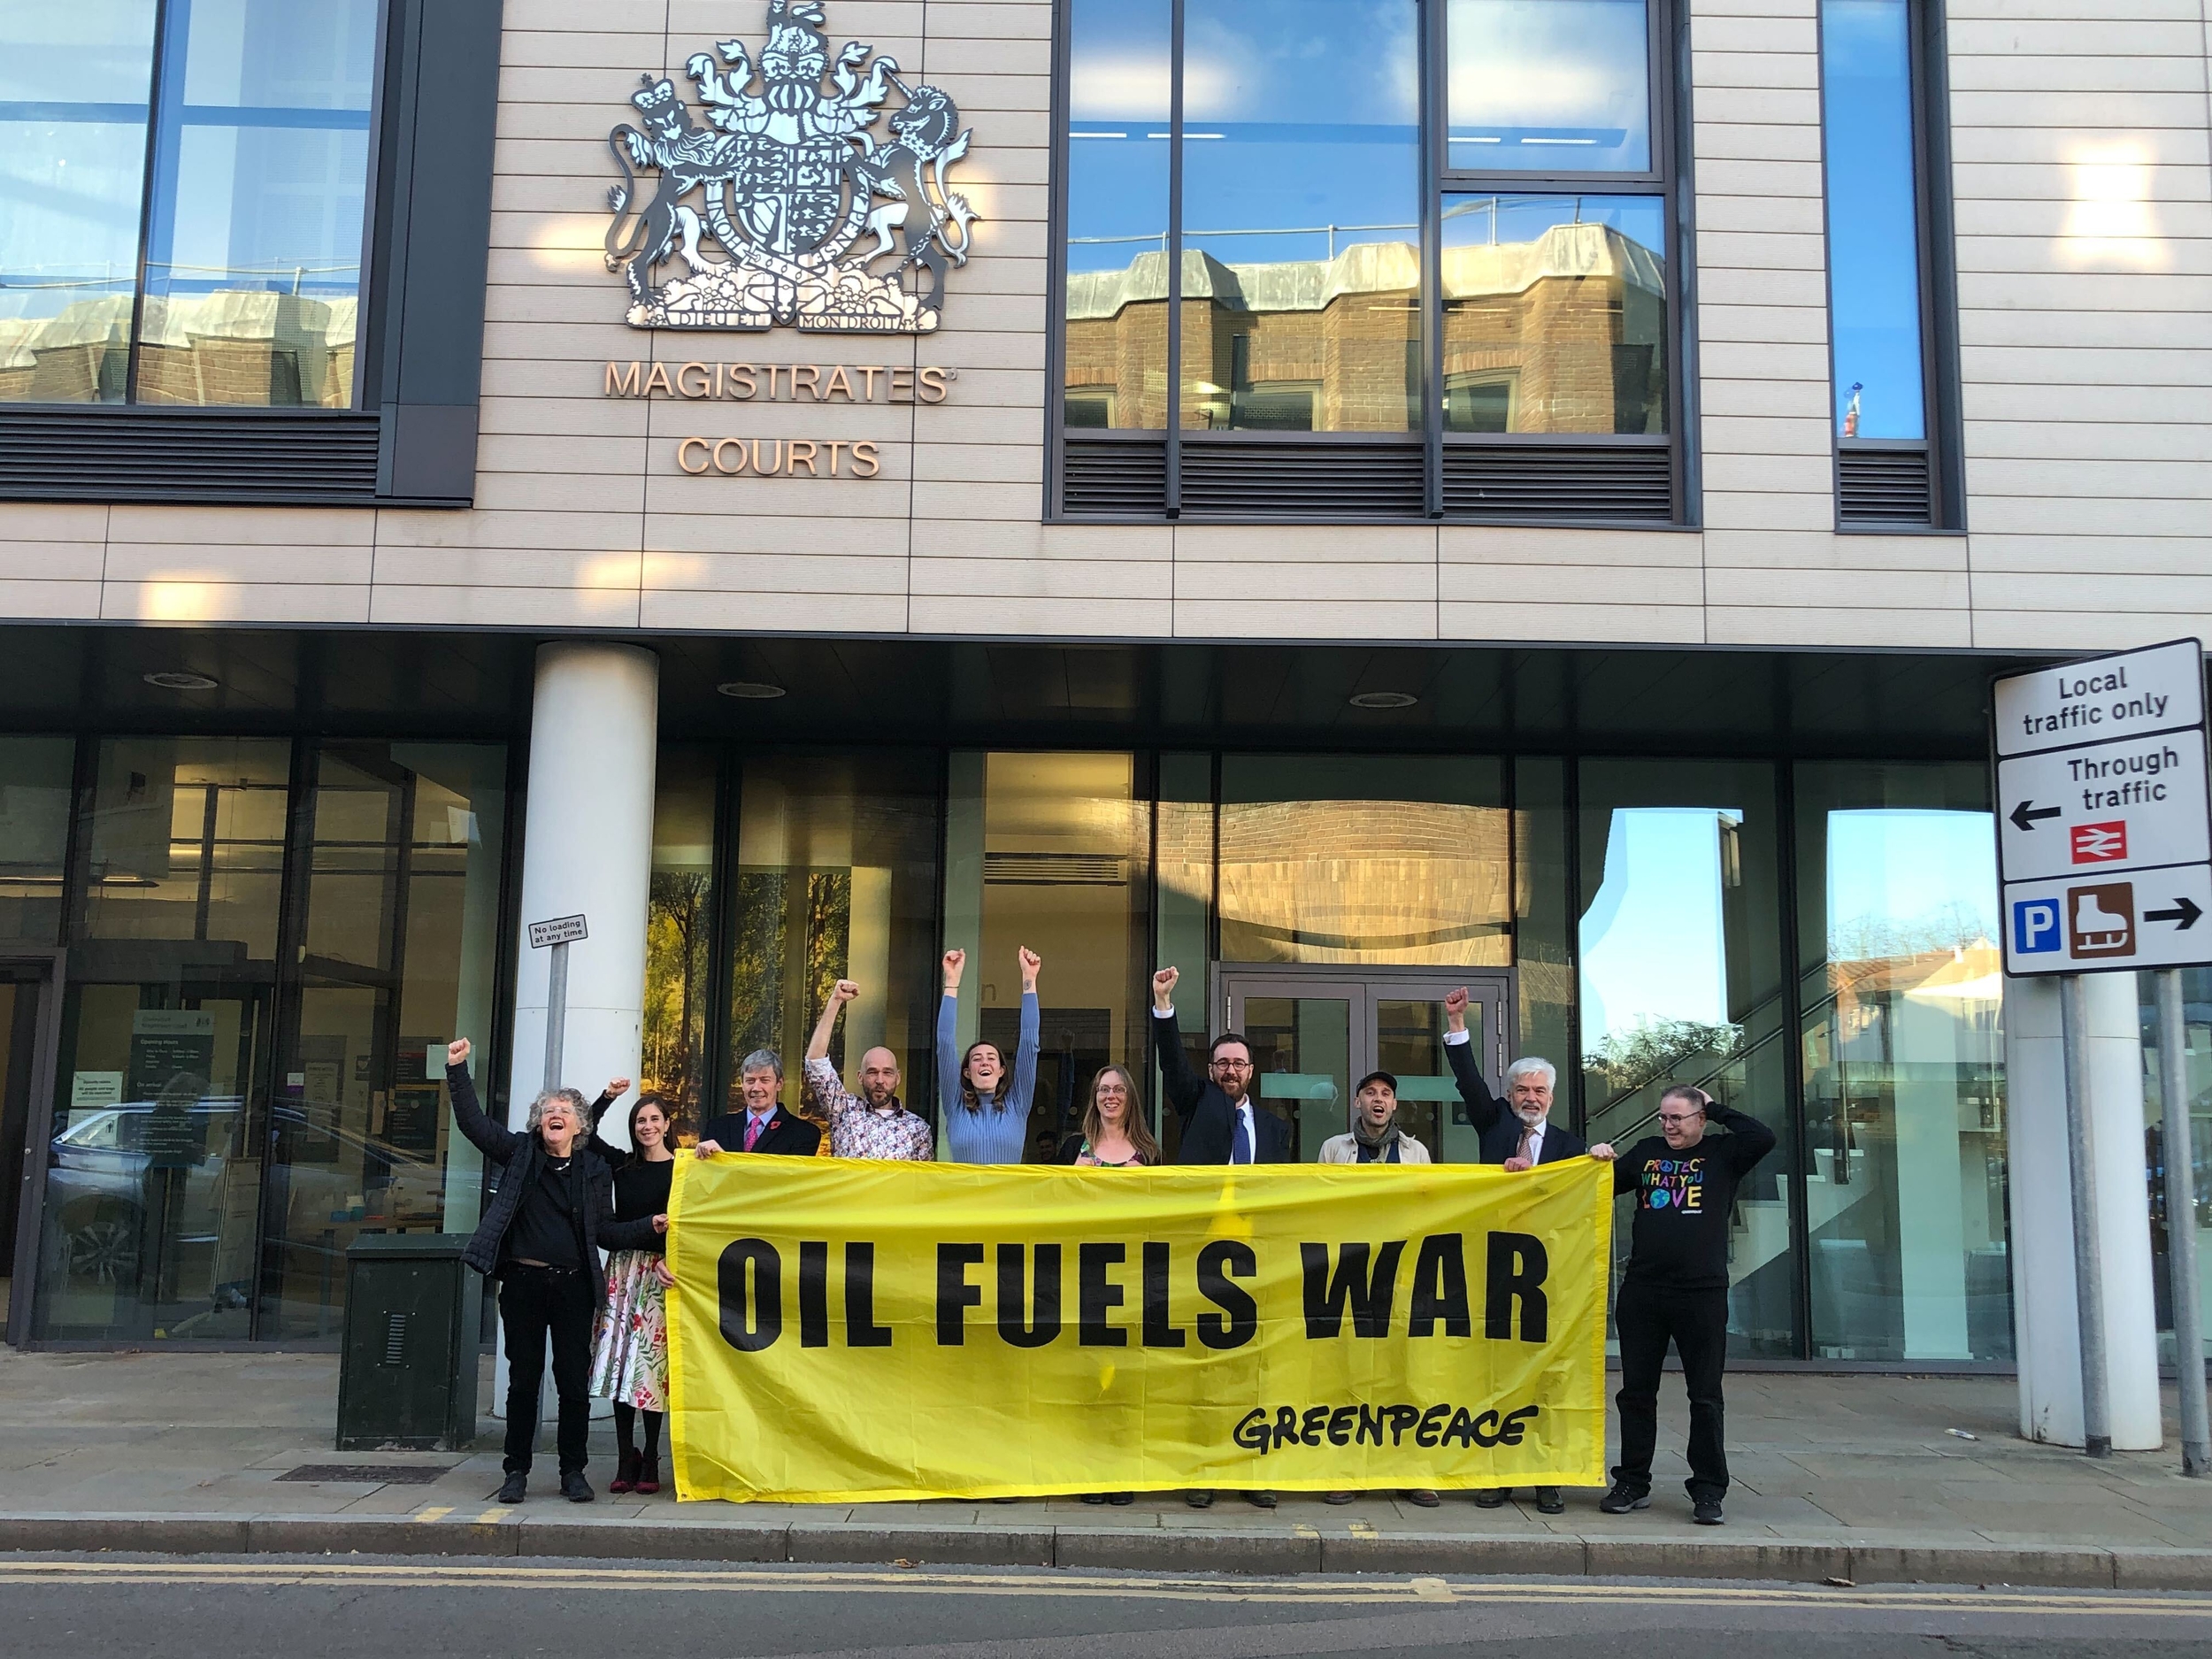 Greenpeace tanker activists celebrate outside court. They thrust their arms in the air and hold a banner reading "Oil fuels war"